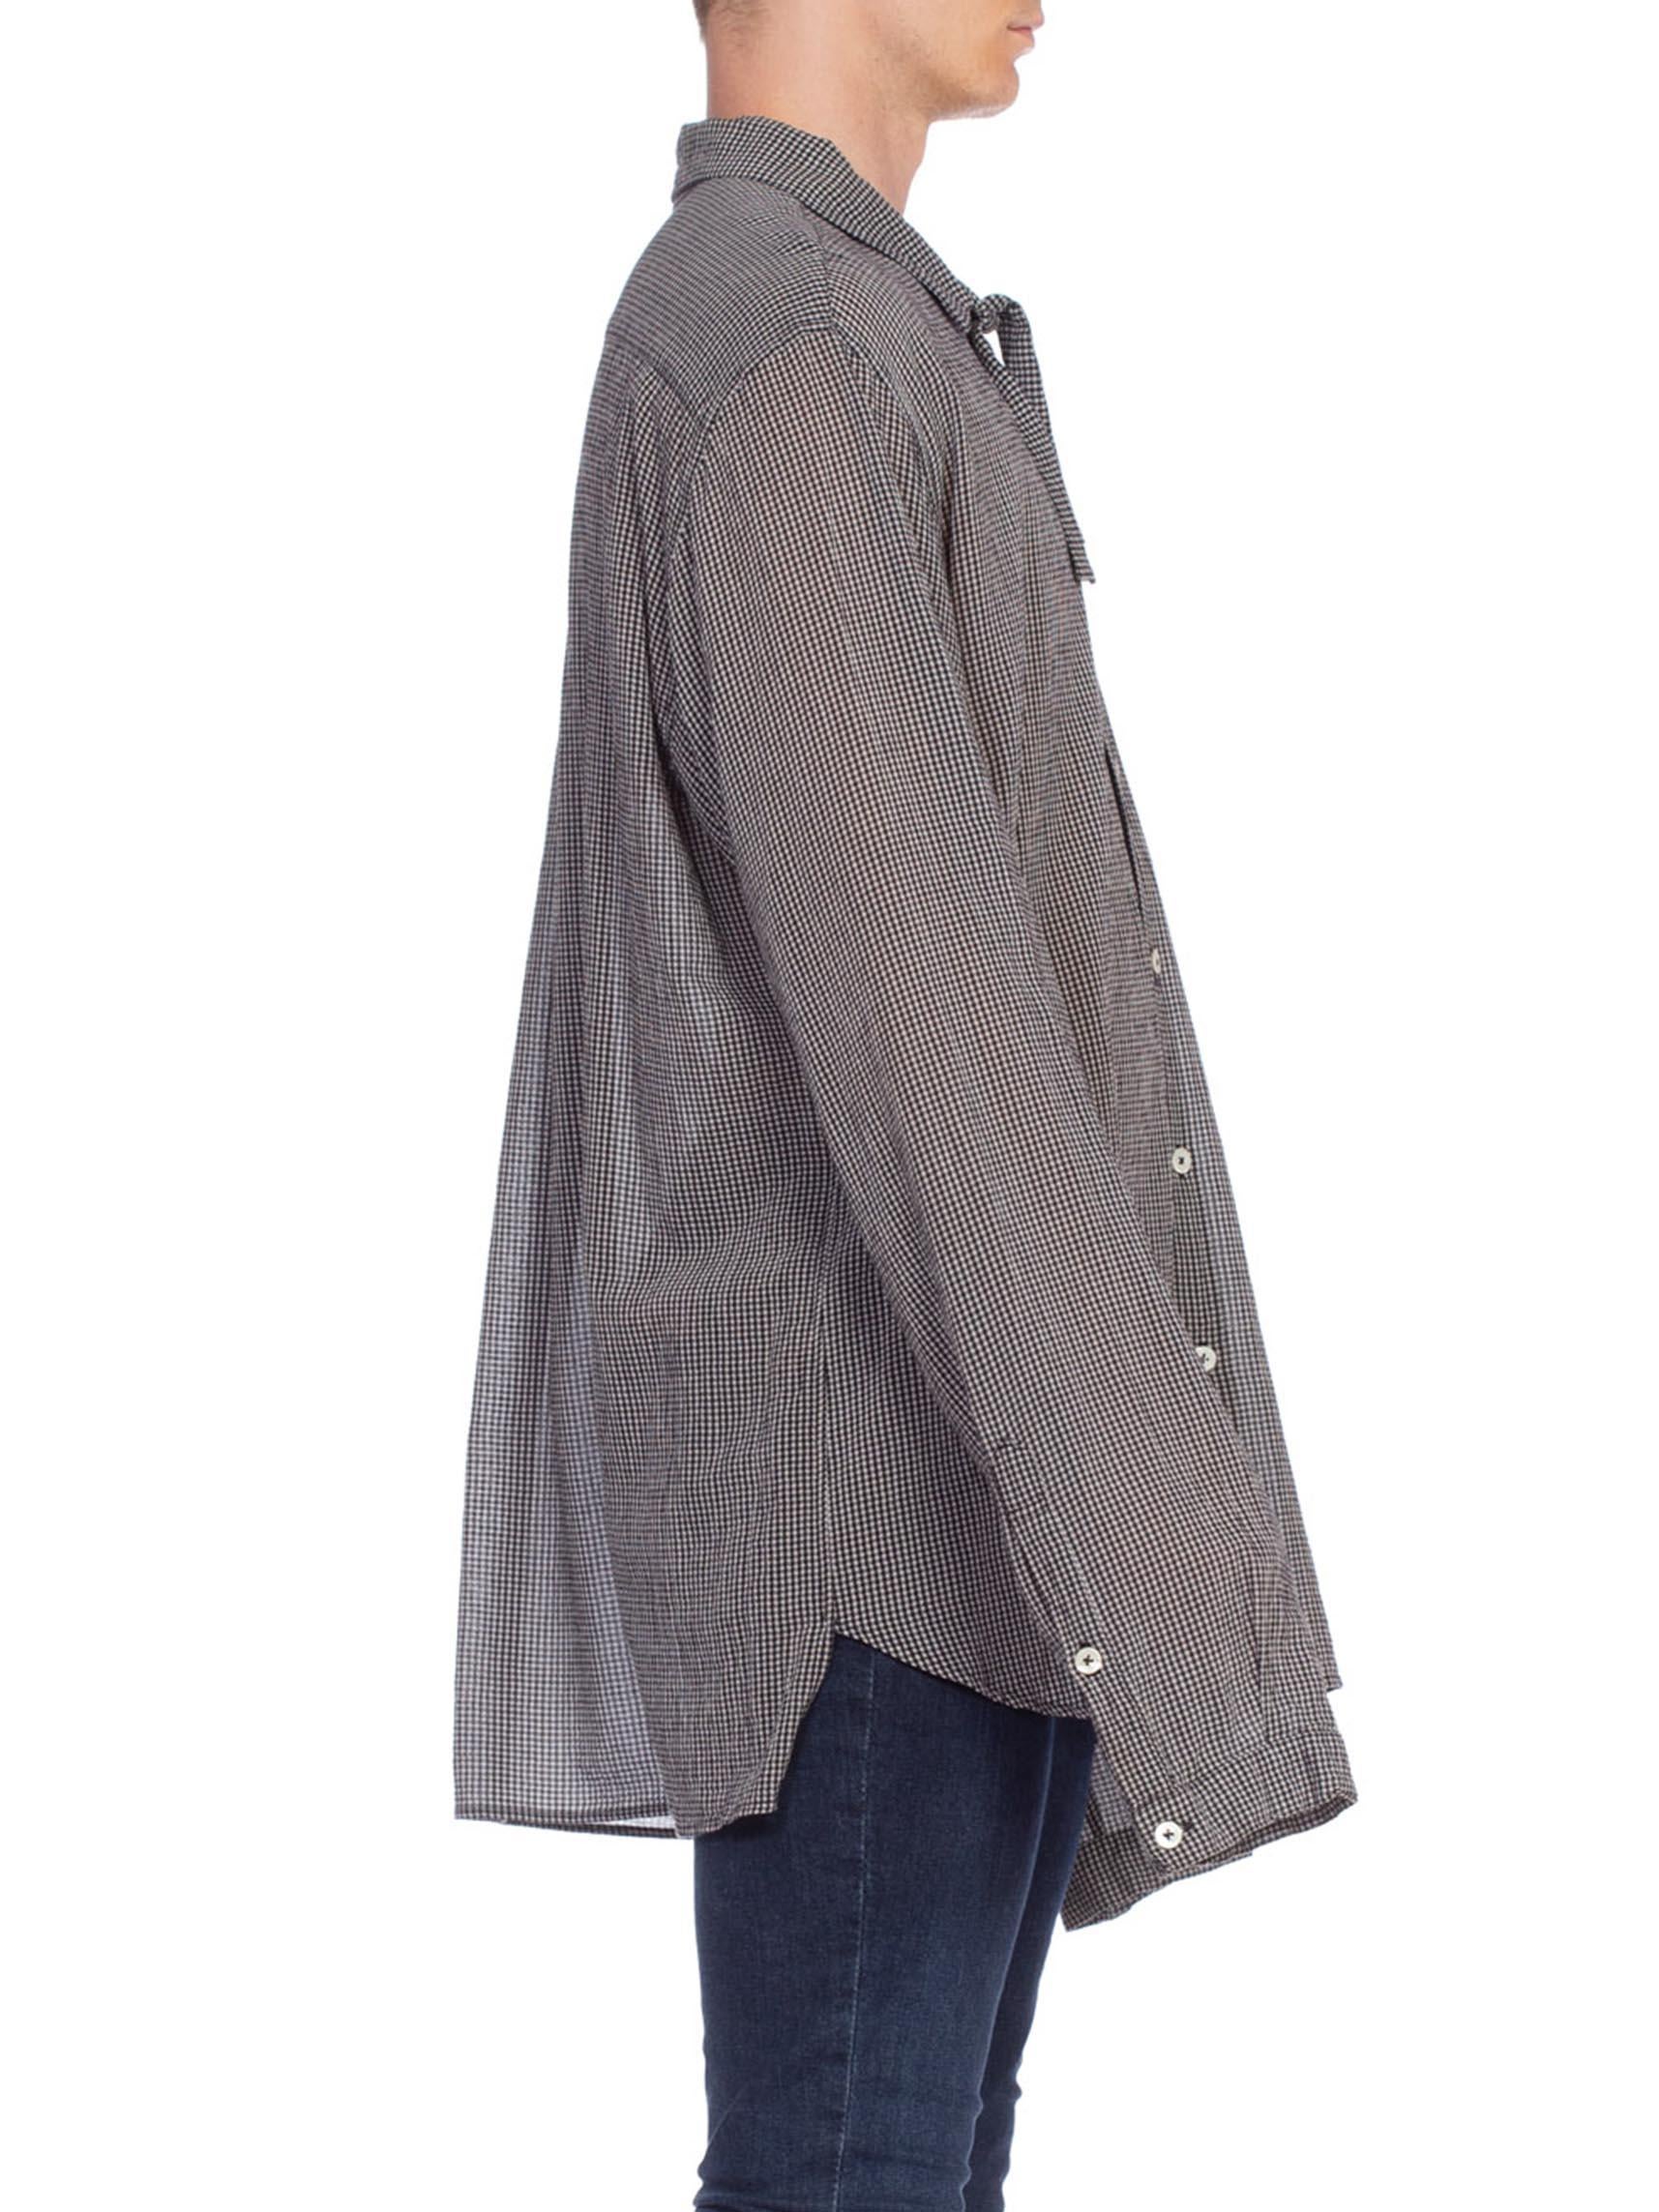 2000S ANN DEMEULEMEESTER Rayon Crepe Men's Oversized Bow Neck Shirt For Sale 1